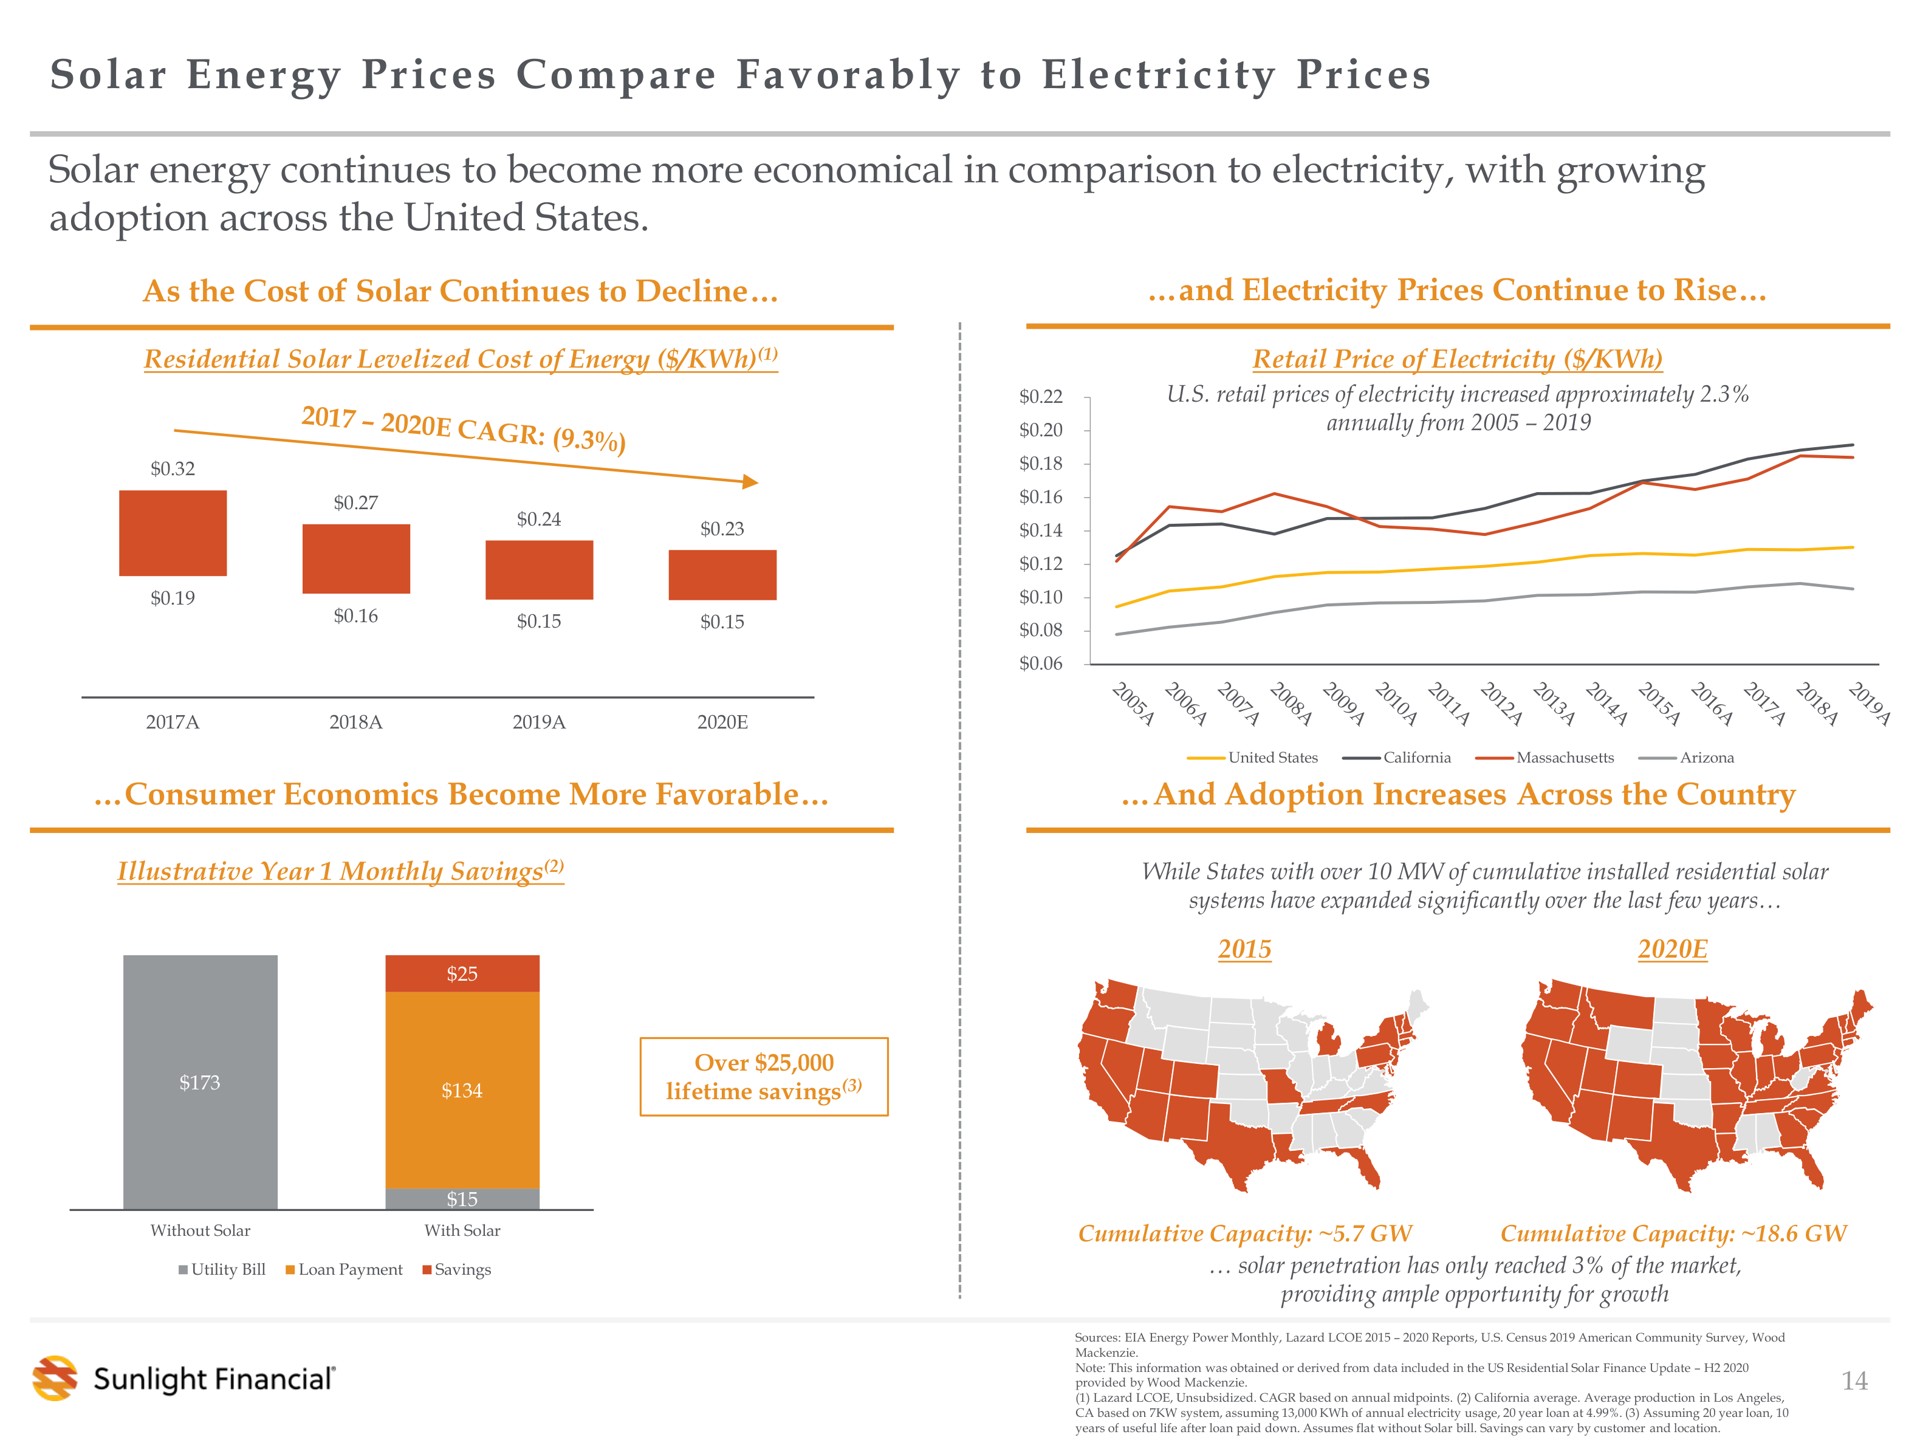 solar energy prices compare favorably to prices solar energy continues to become more economical in comparison to electricity with growing adoption across the united states i rive me | Sunlight Financial